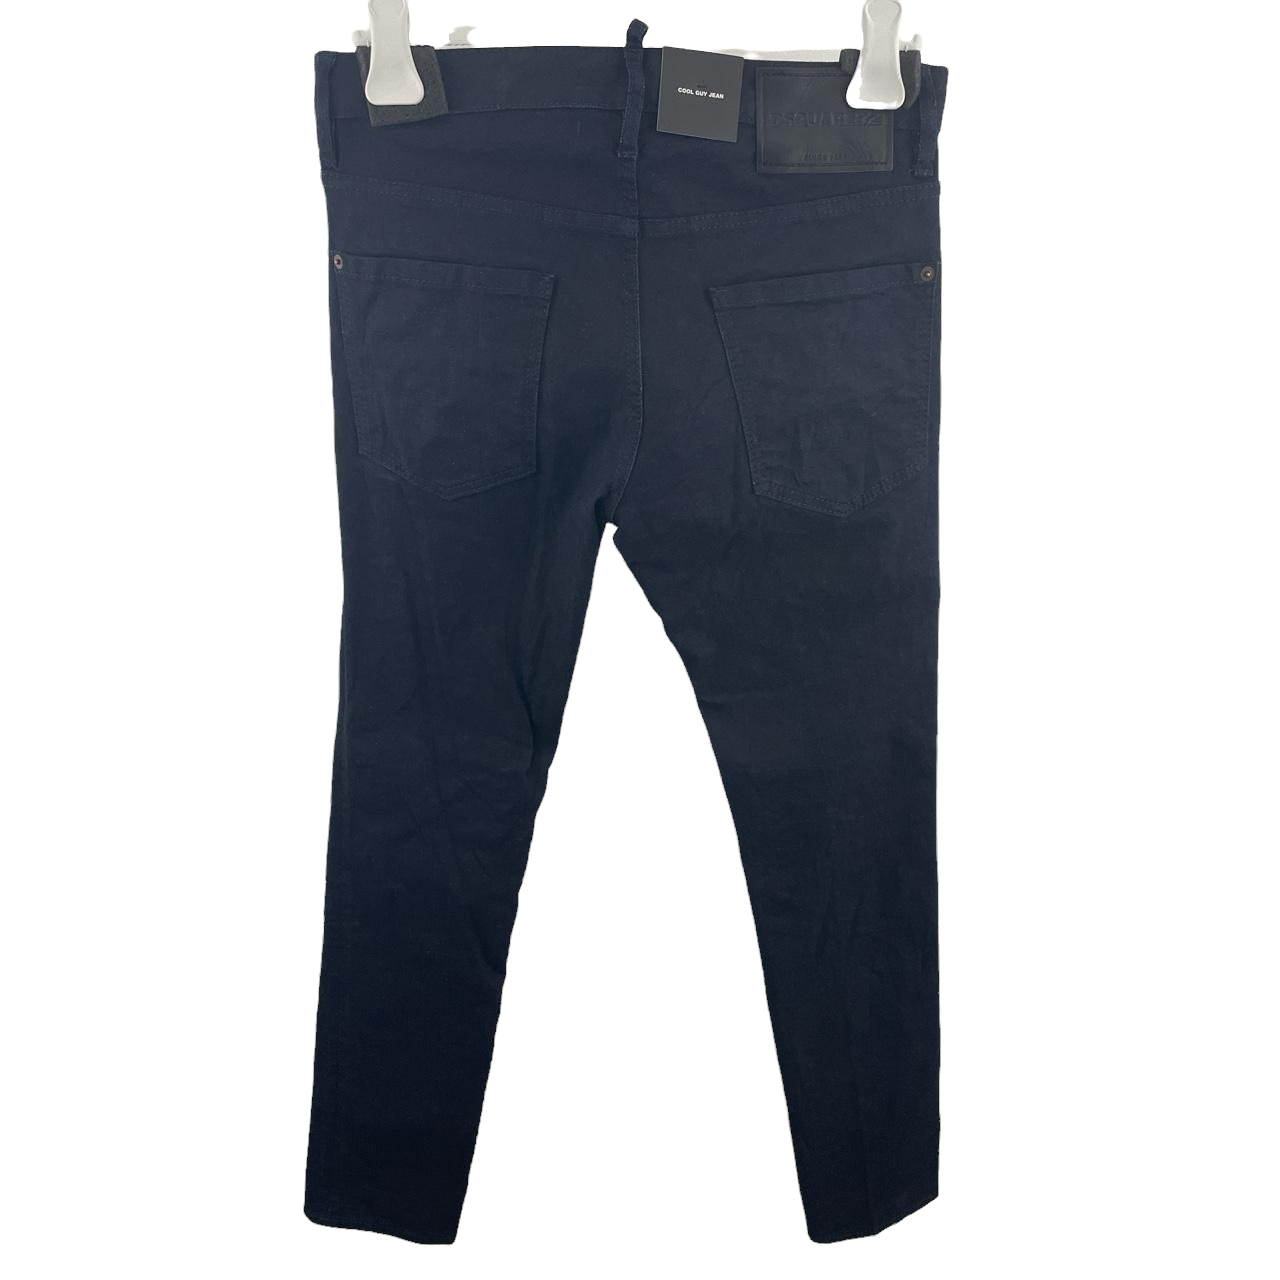 DSQUARED2 COOL GUY SLIM FIT JEANS - NAVY